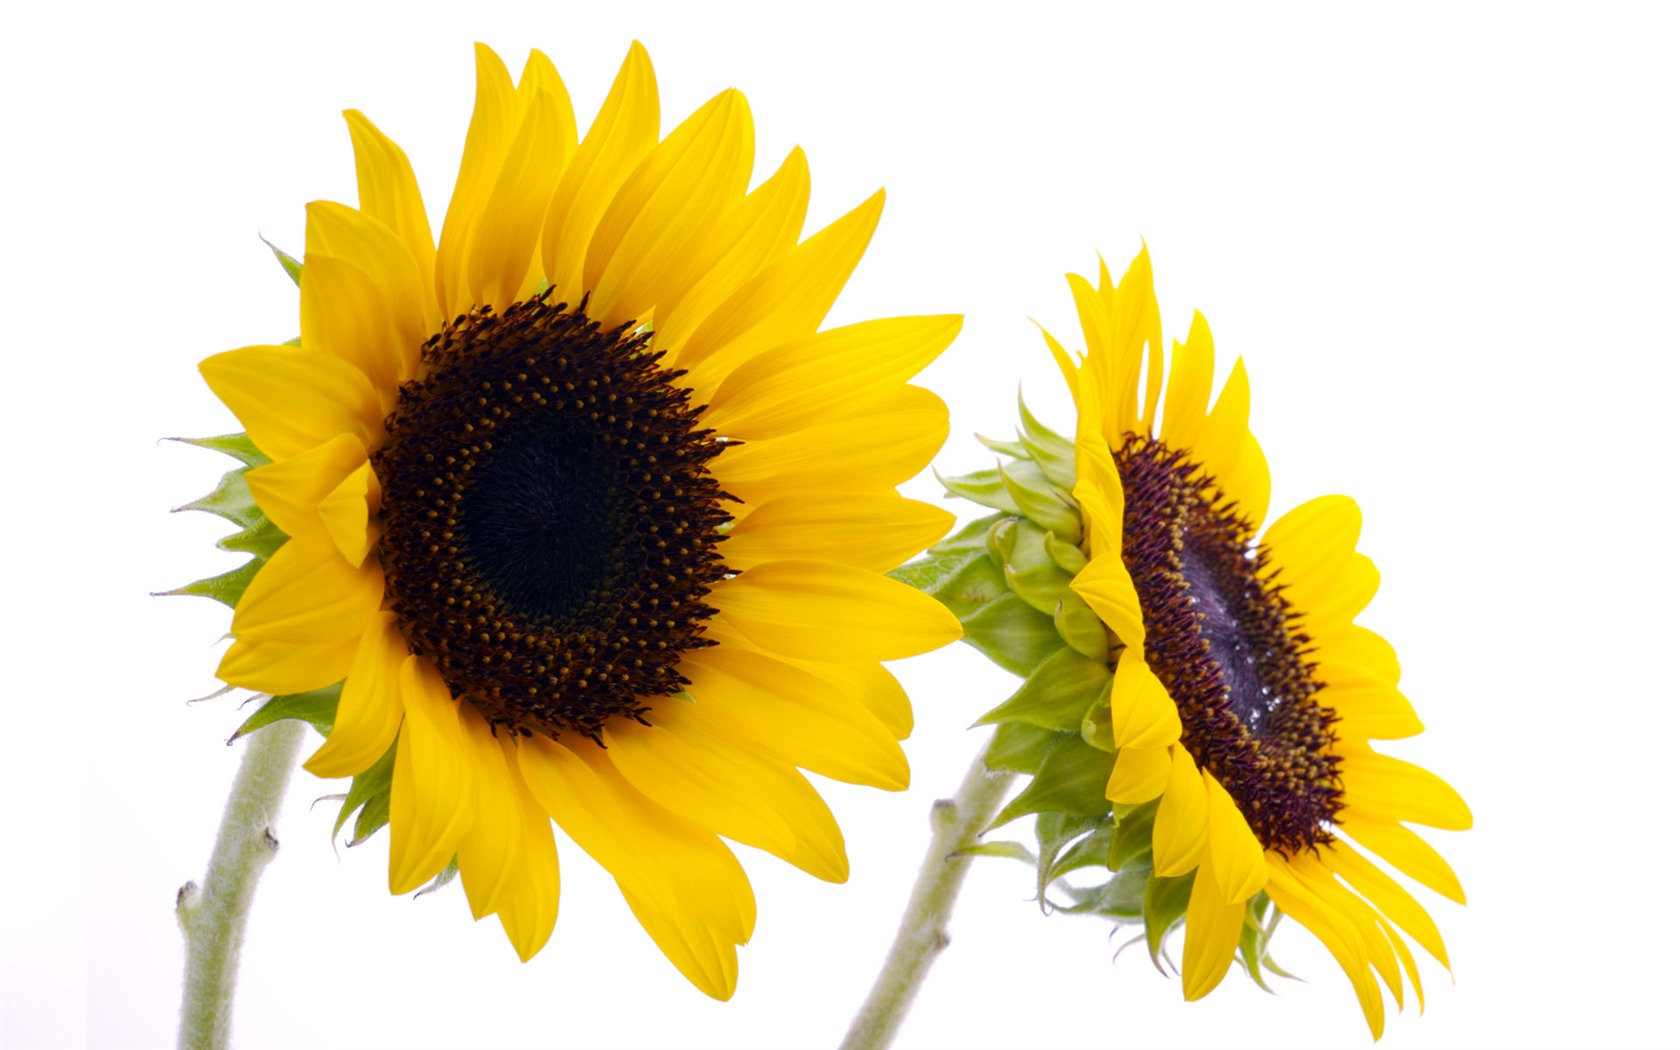 Sunny sunflower photo HD Wallpapers #28 - 1680x1050